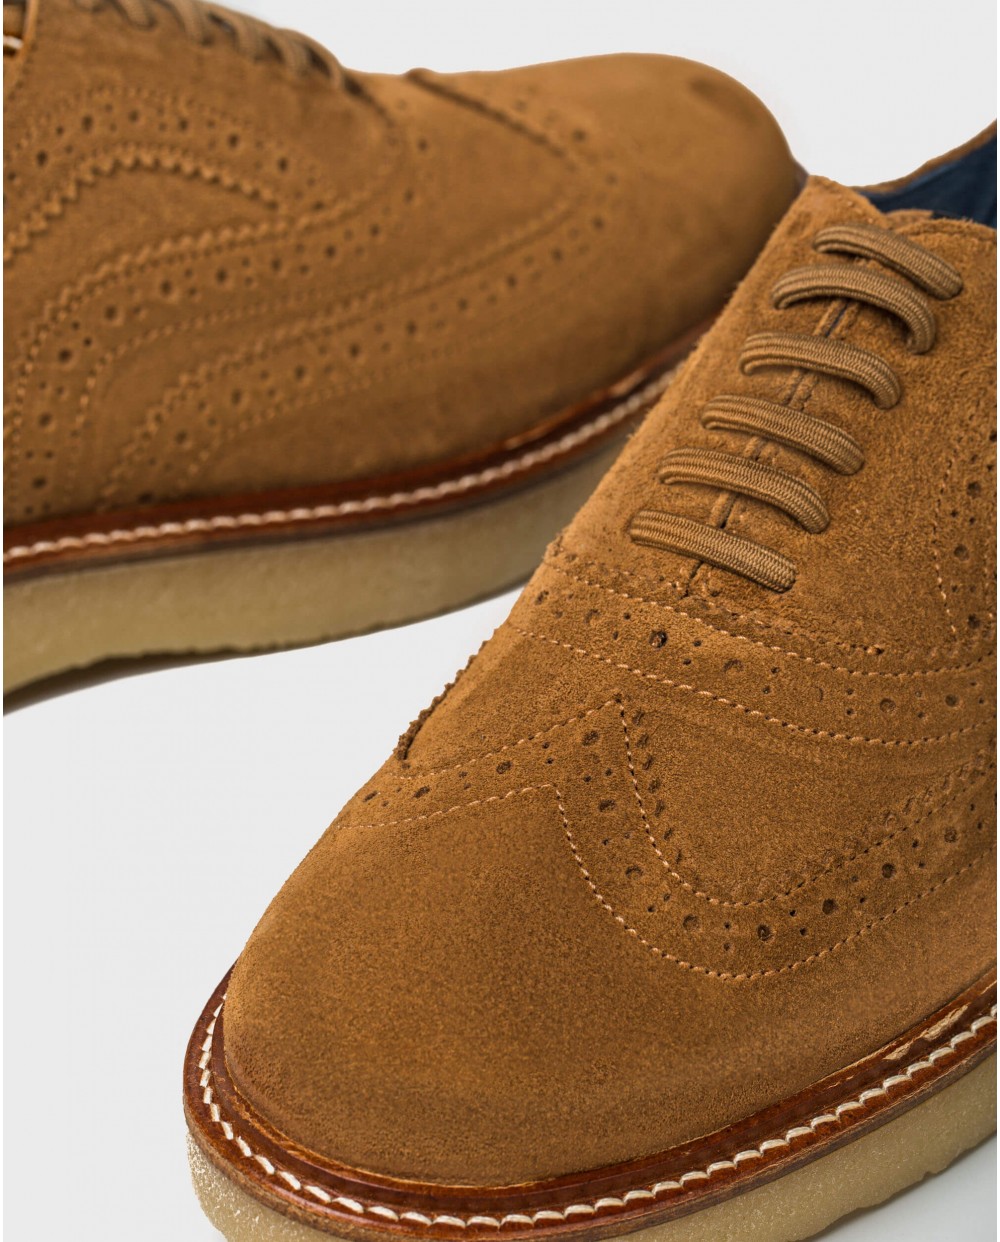 Wonders-Men-Leather shoe with brogue detail